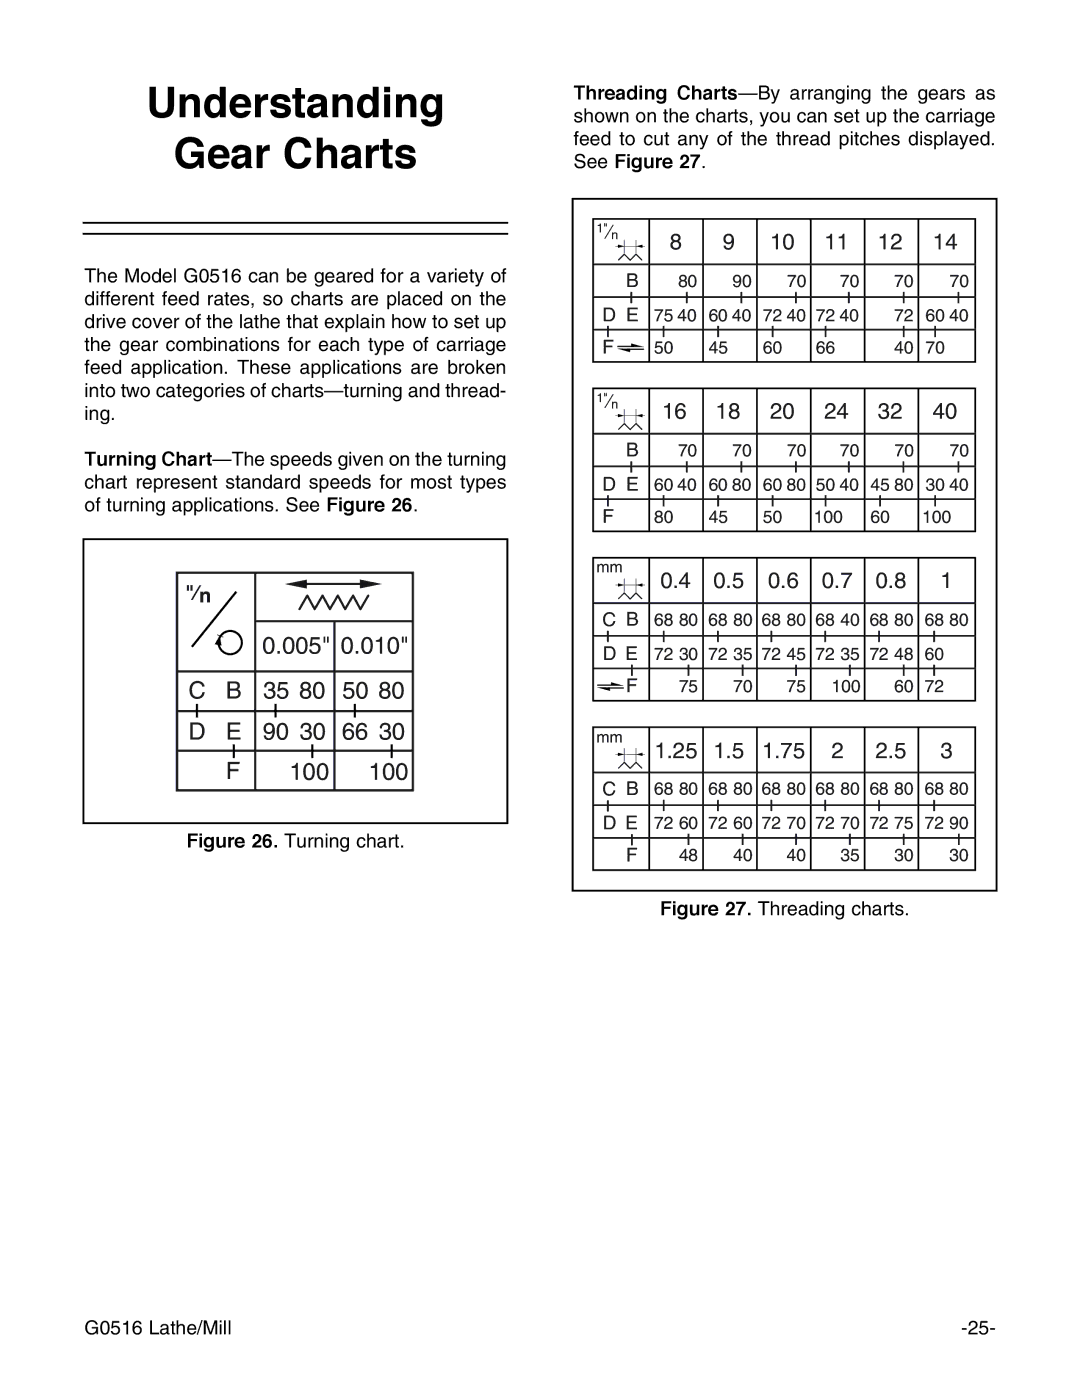 Grizzly G0516 instruction manual Understanding Gear Charts, 100 